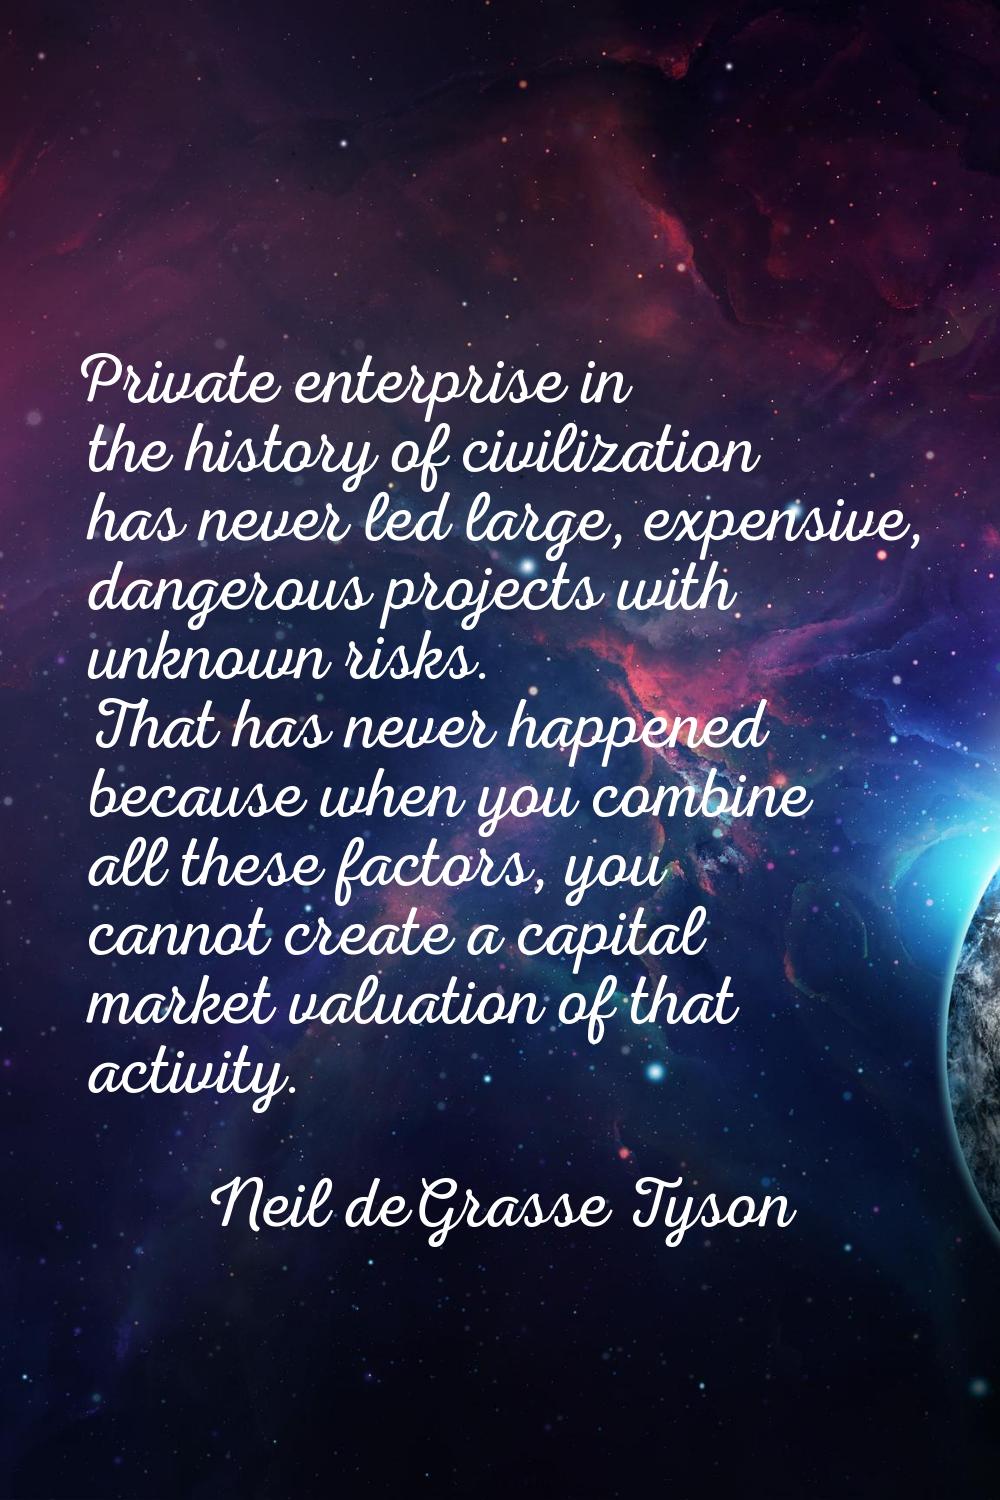 Private enterprise in the history of civilization has never led large, expensive, dangerous project